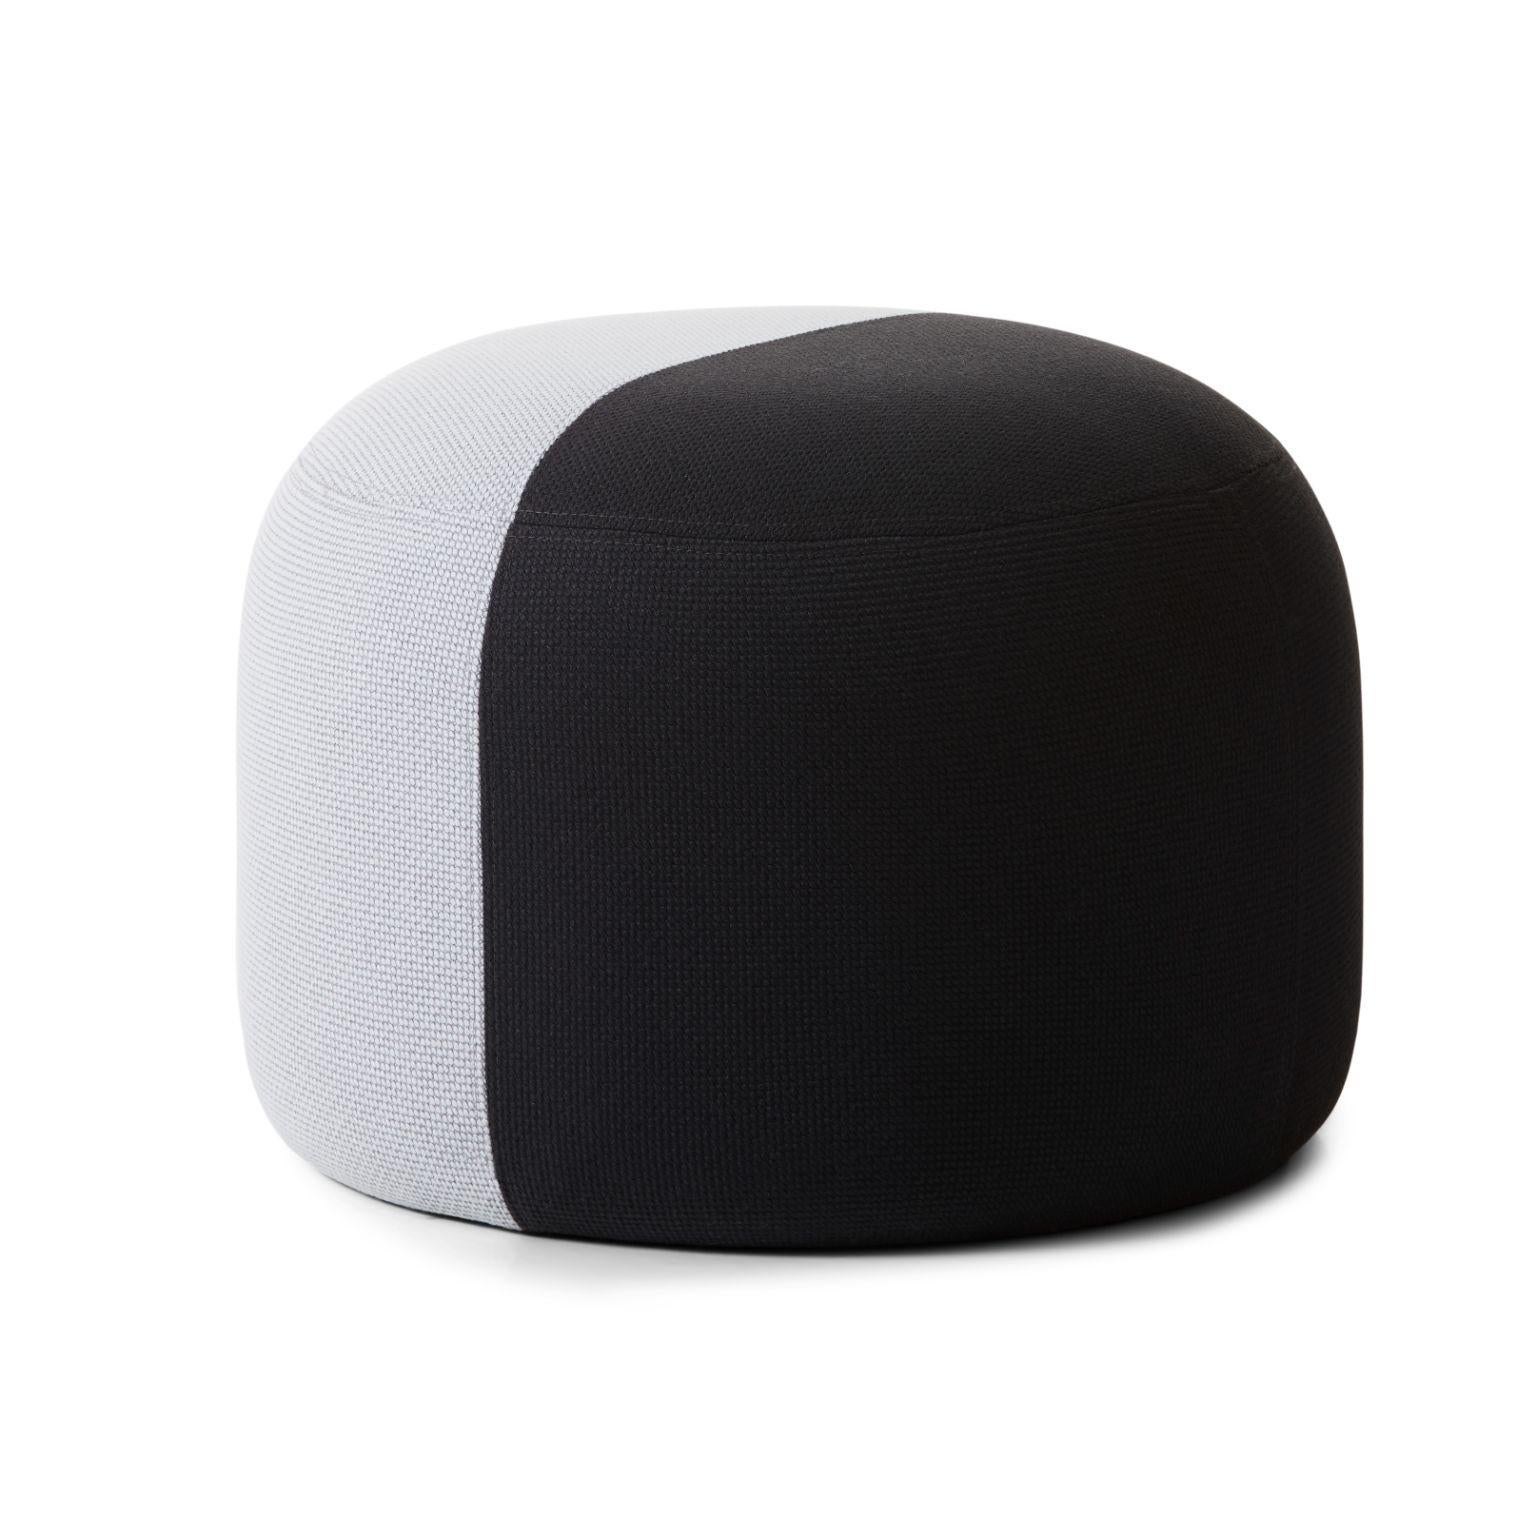 Dainty Pouf Soft Grey Coral Black by Warm Nordic
Dimensions: D55 x H 39 cm
Material: Textile upholstery, Wooden frame, foam.
Weight: 9.5 kg
Also available in different colours and finishes. Please contact us.

Sophisticated, two-coloured pouf